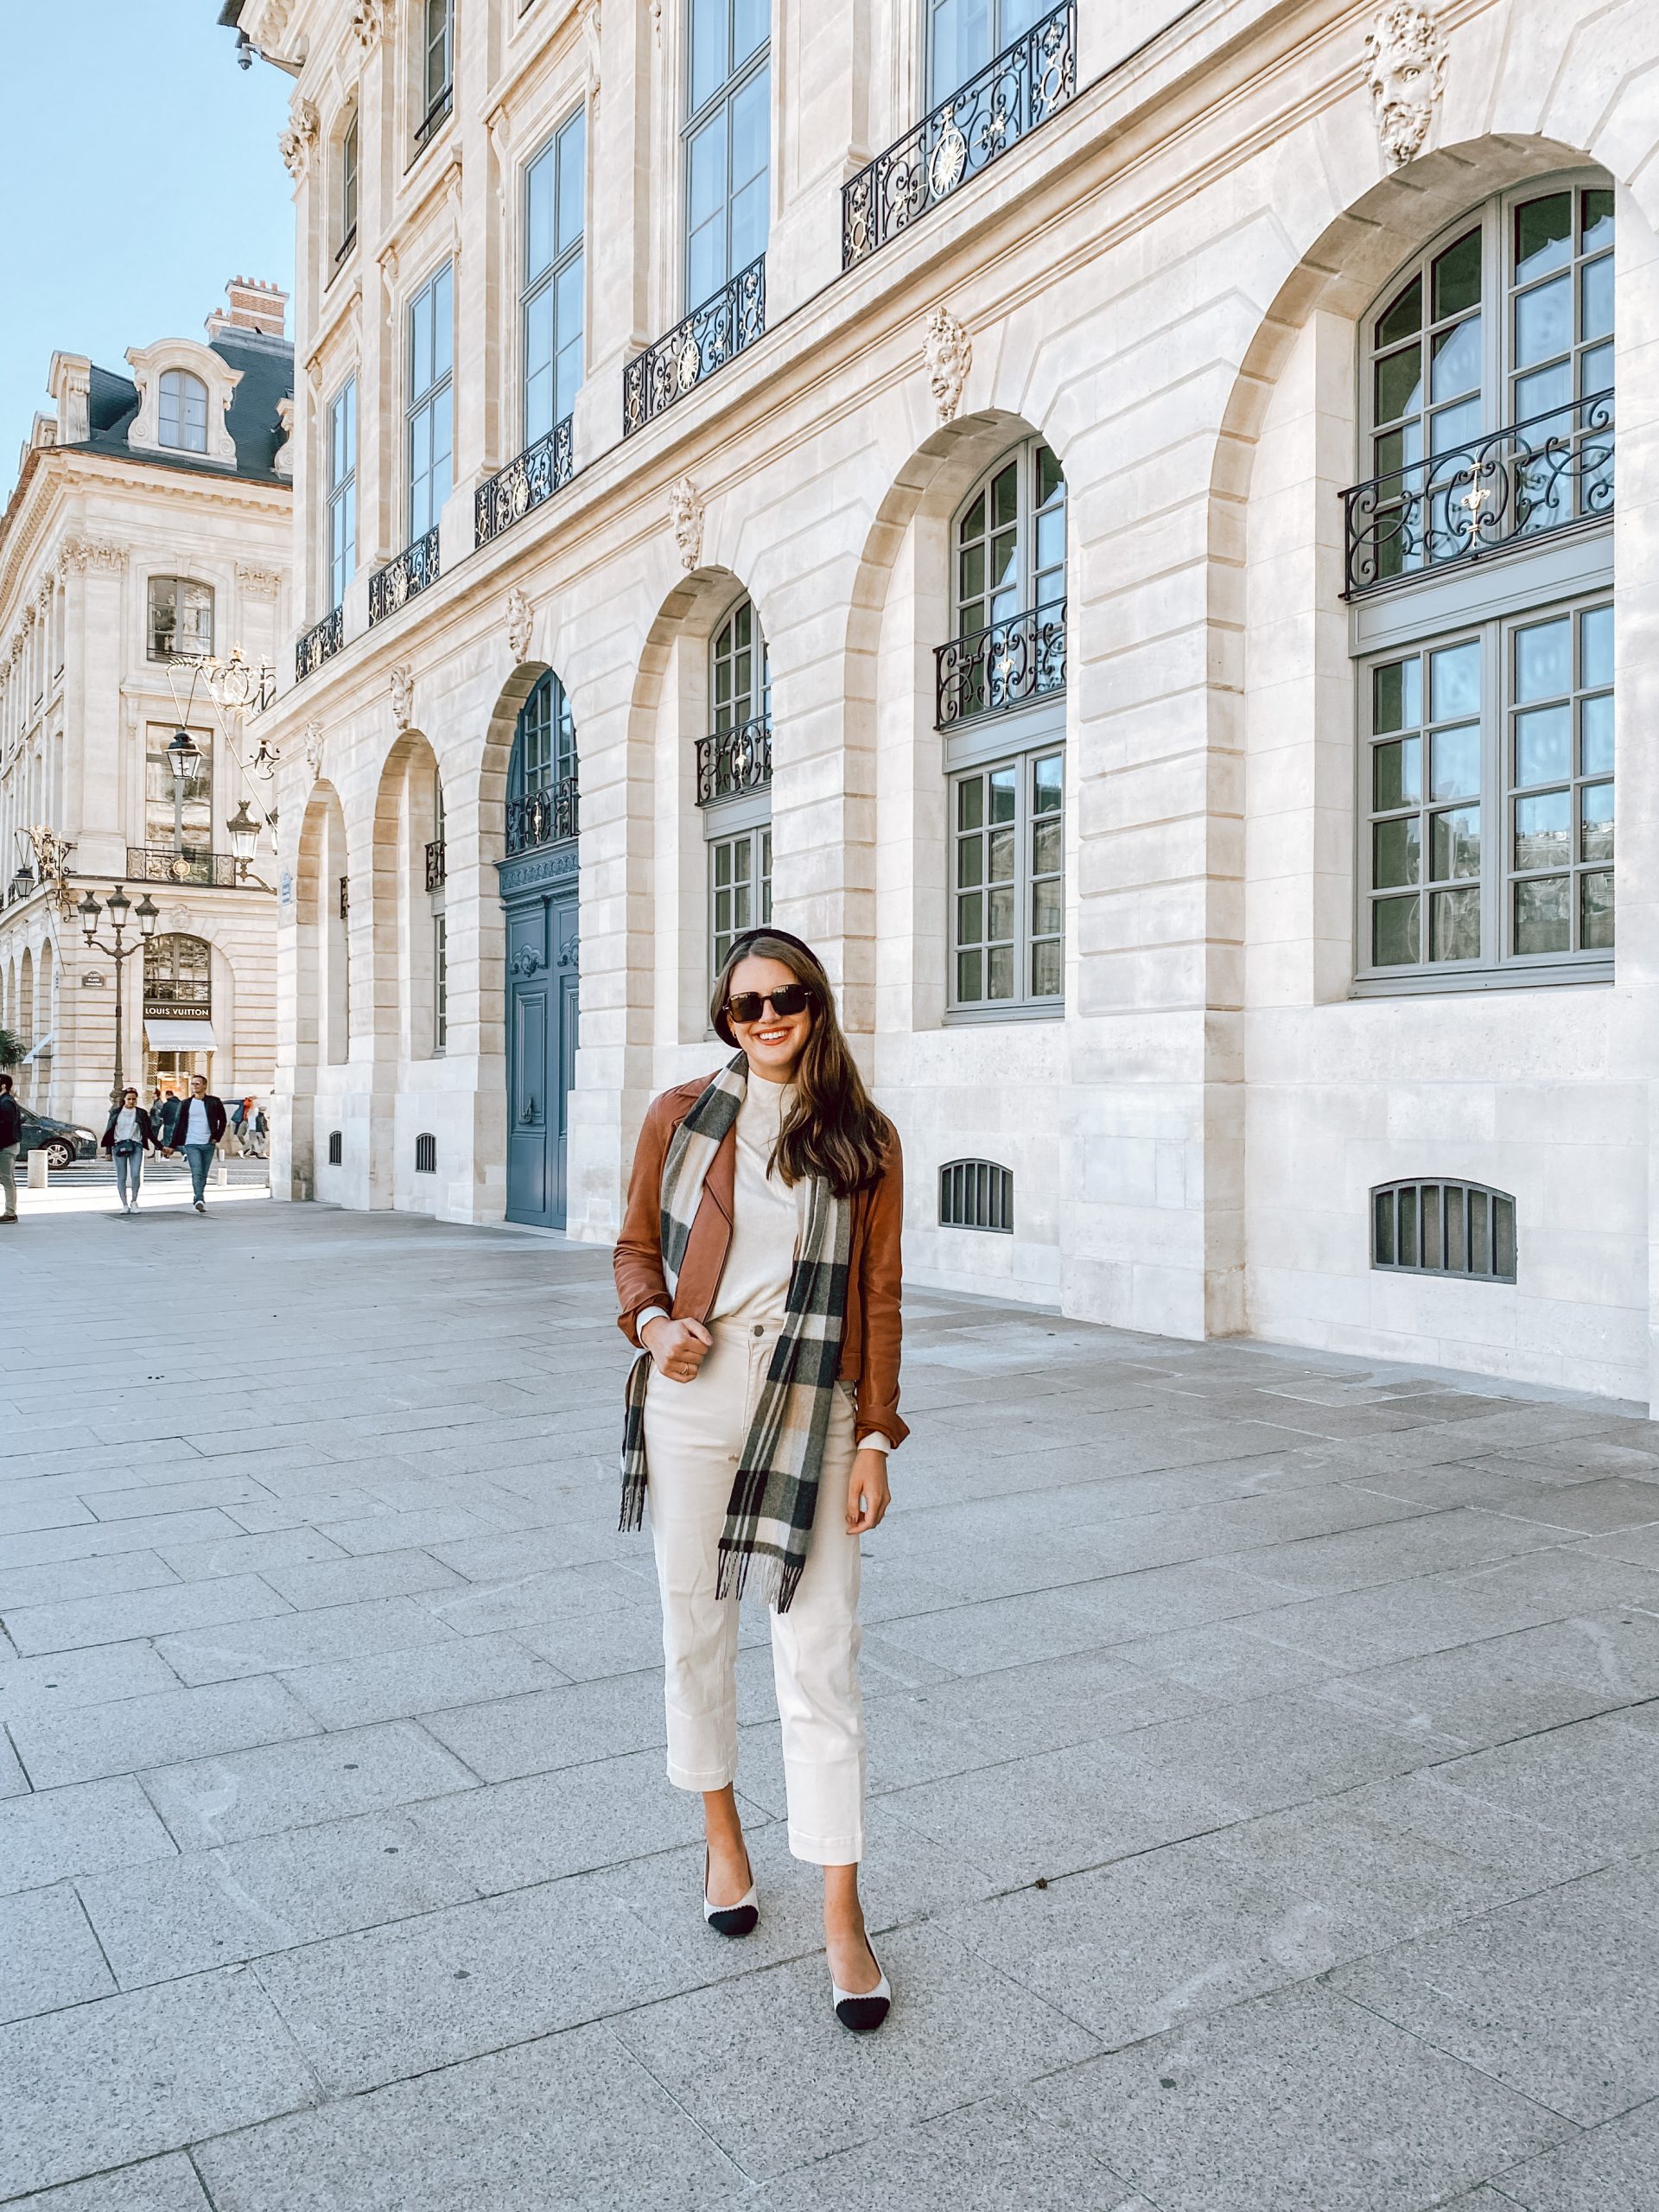 Shopping around Place Vendôme | What I wore in Paris